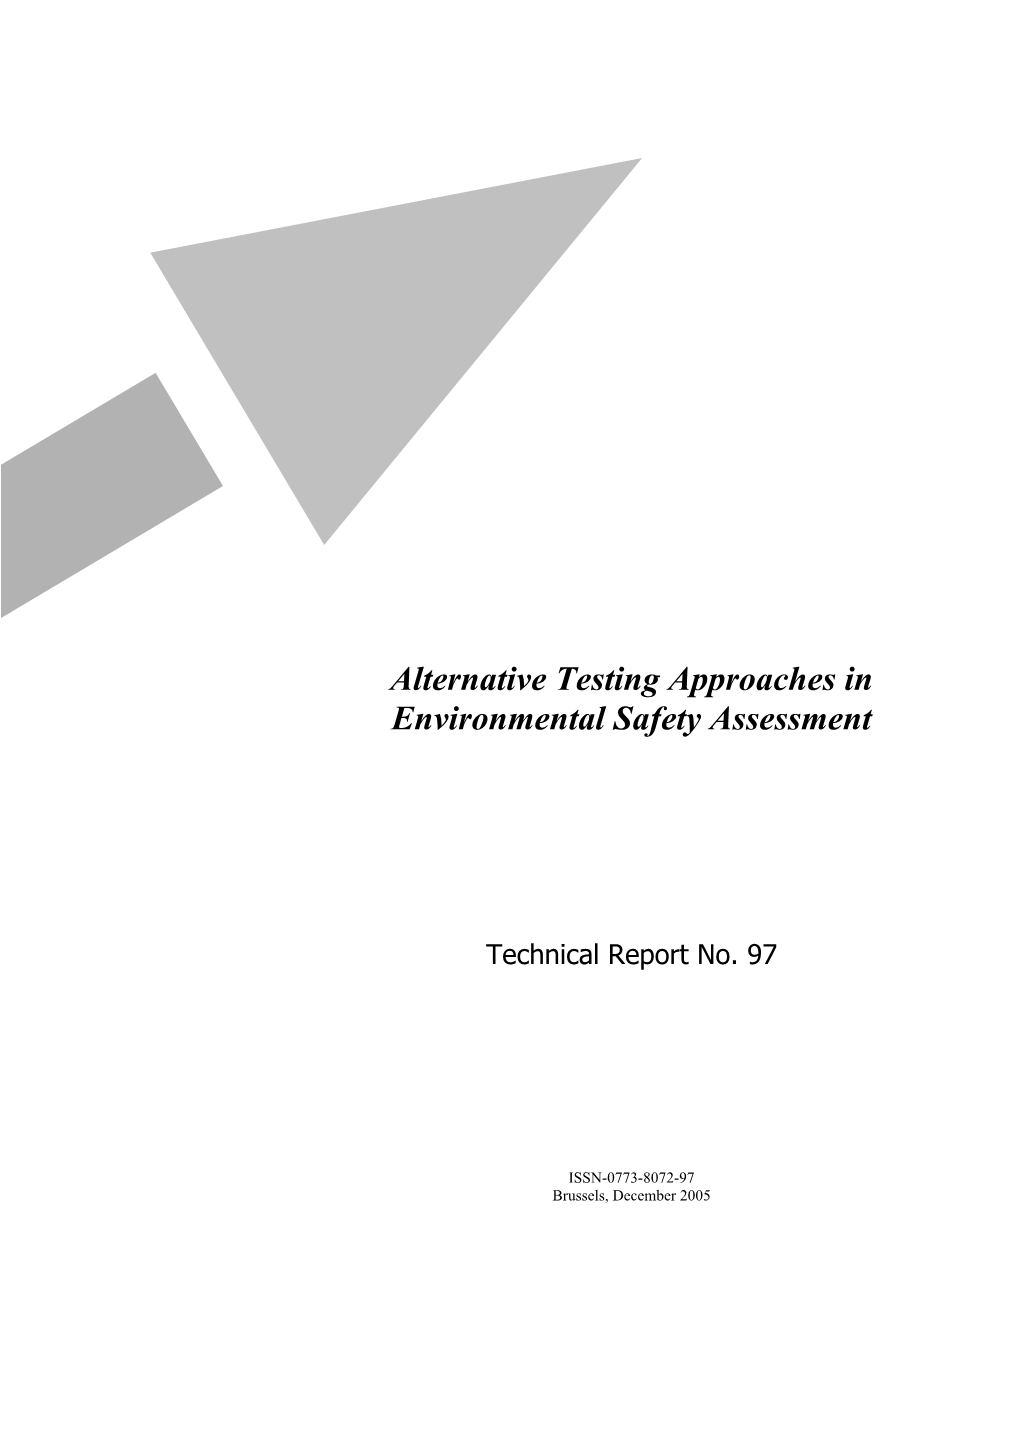 Alternative Testing Approaches in Environmental Safety Assessment